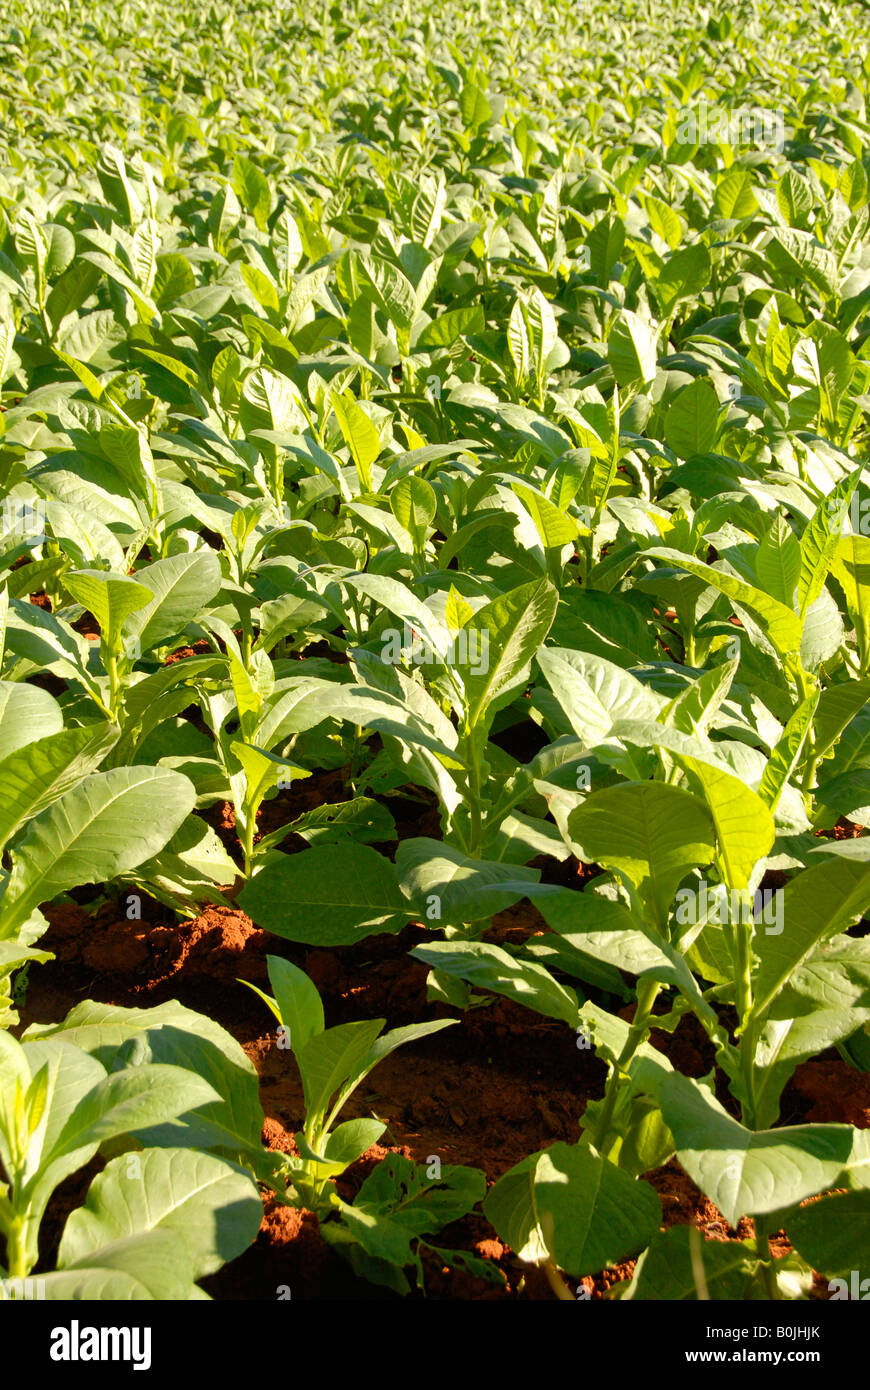 Close up view of a tobacco plantation Stock Photo